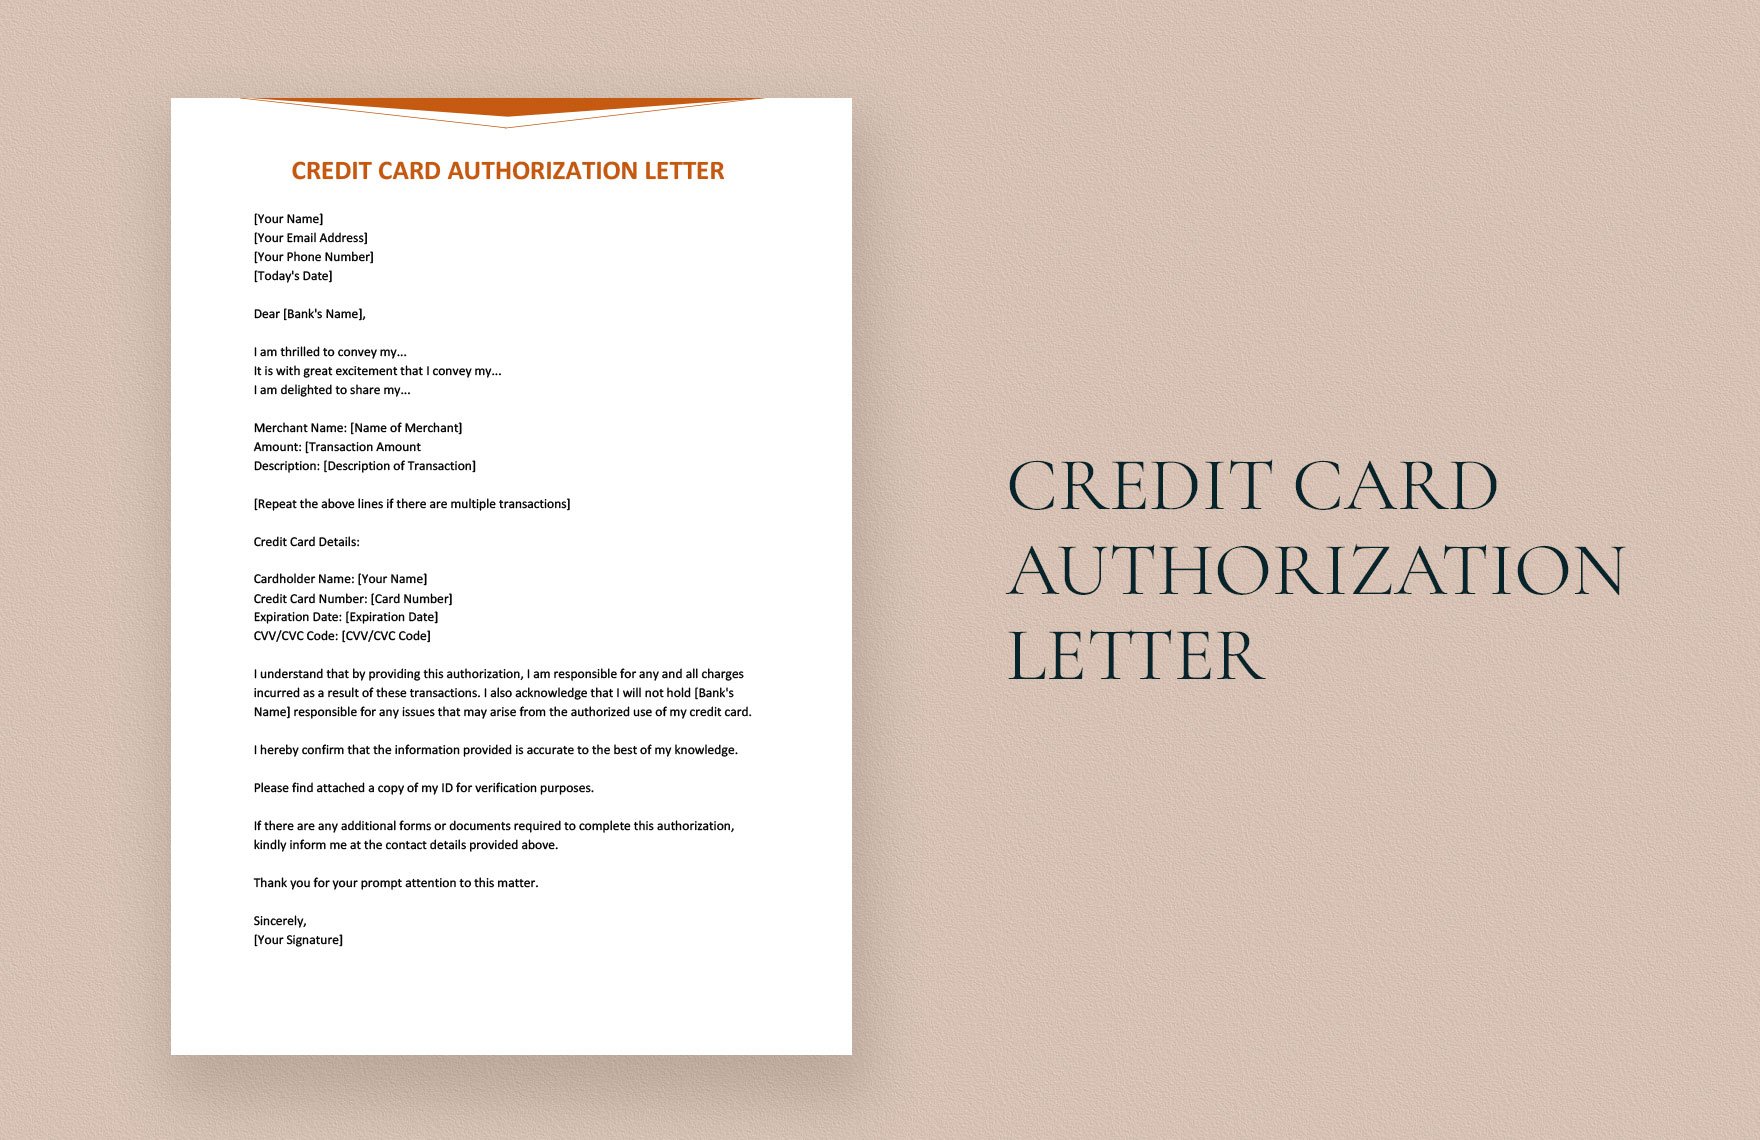 Credit Card Authorization Letter